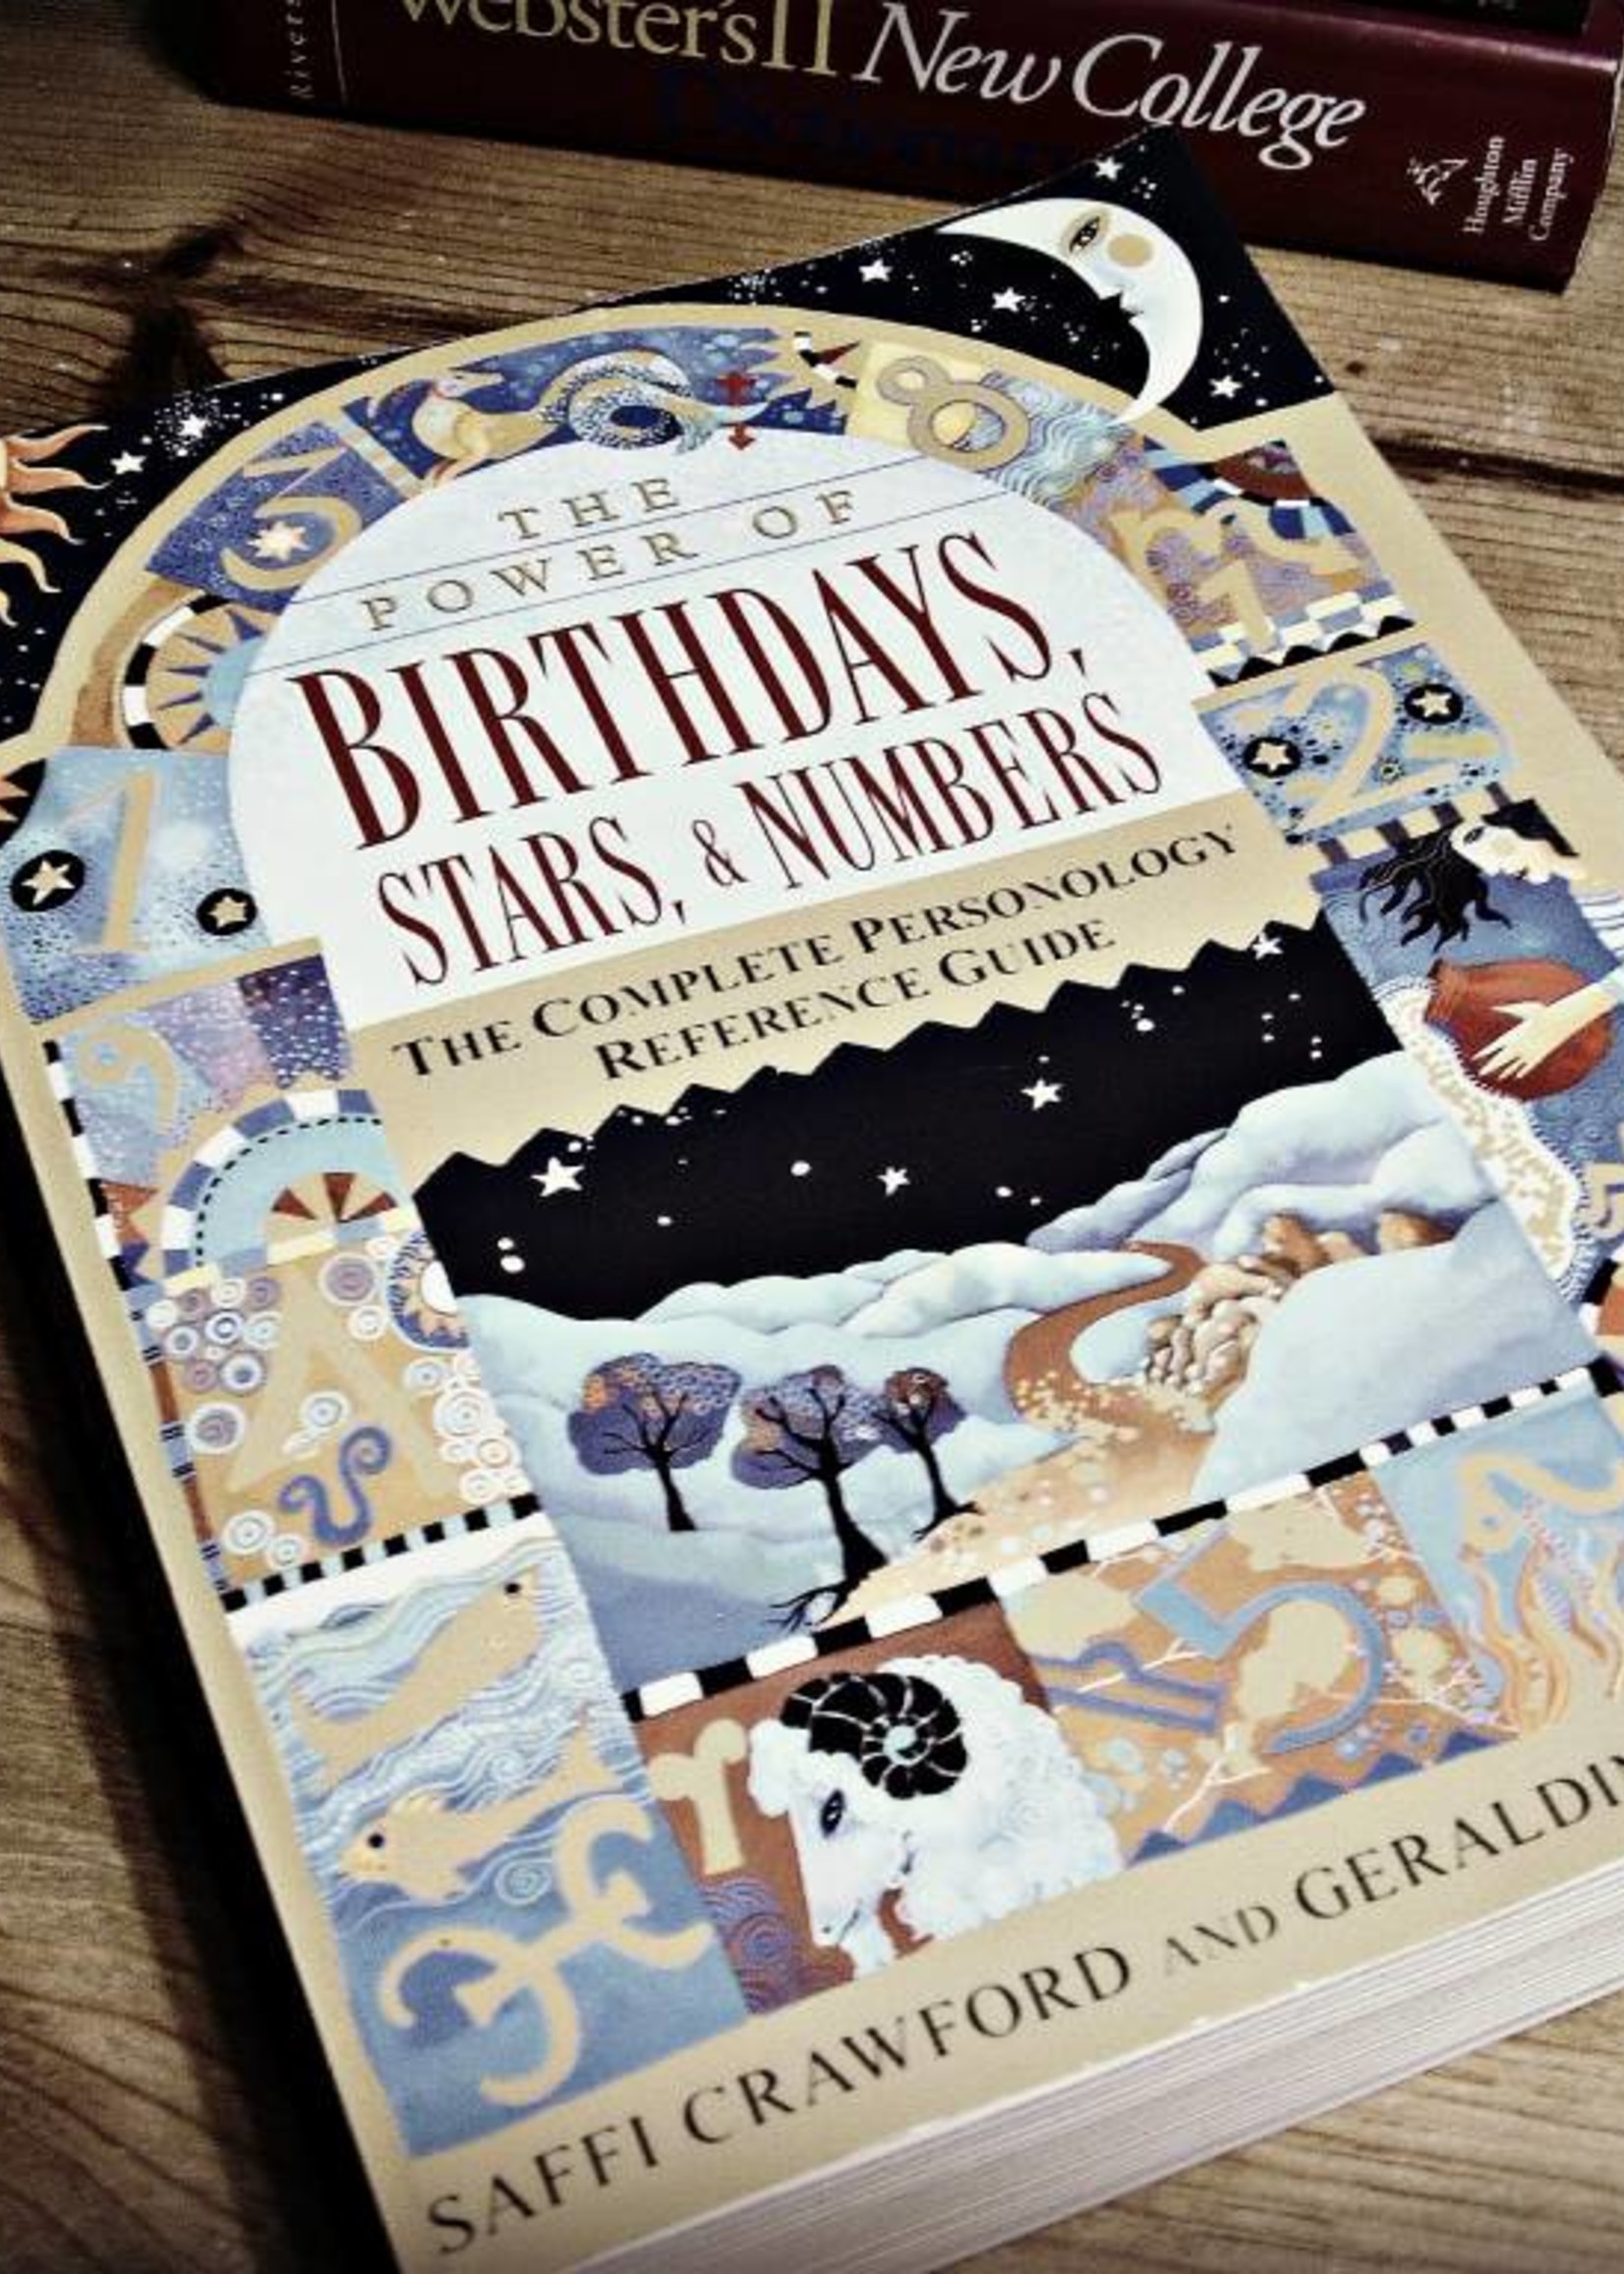 The Power of Birthdays, Stars & Numbers | The Complete Personology Reference Guide